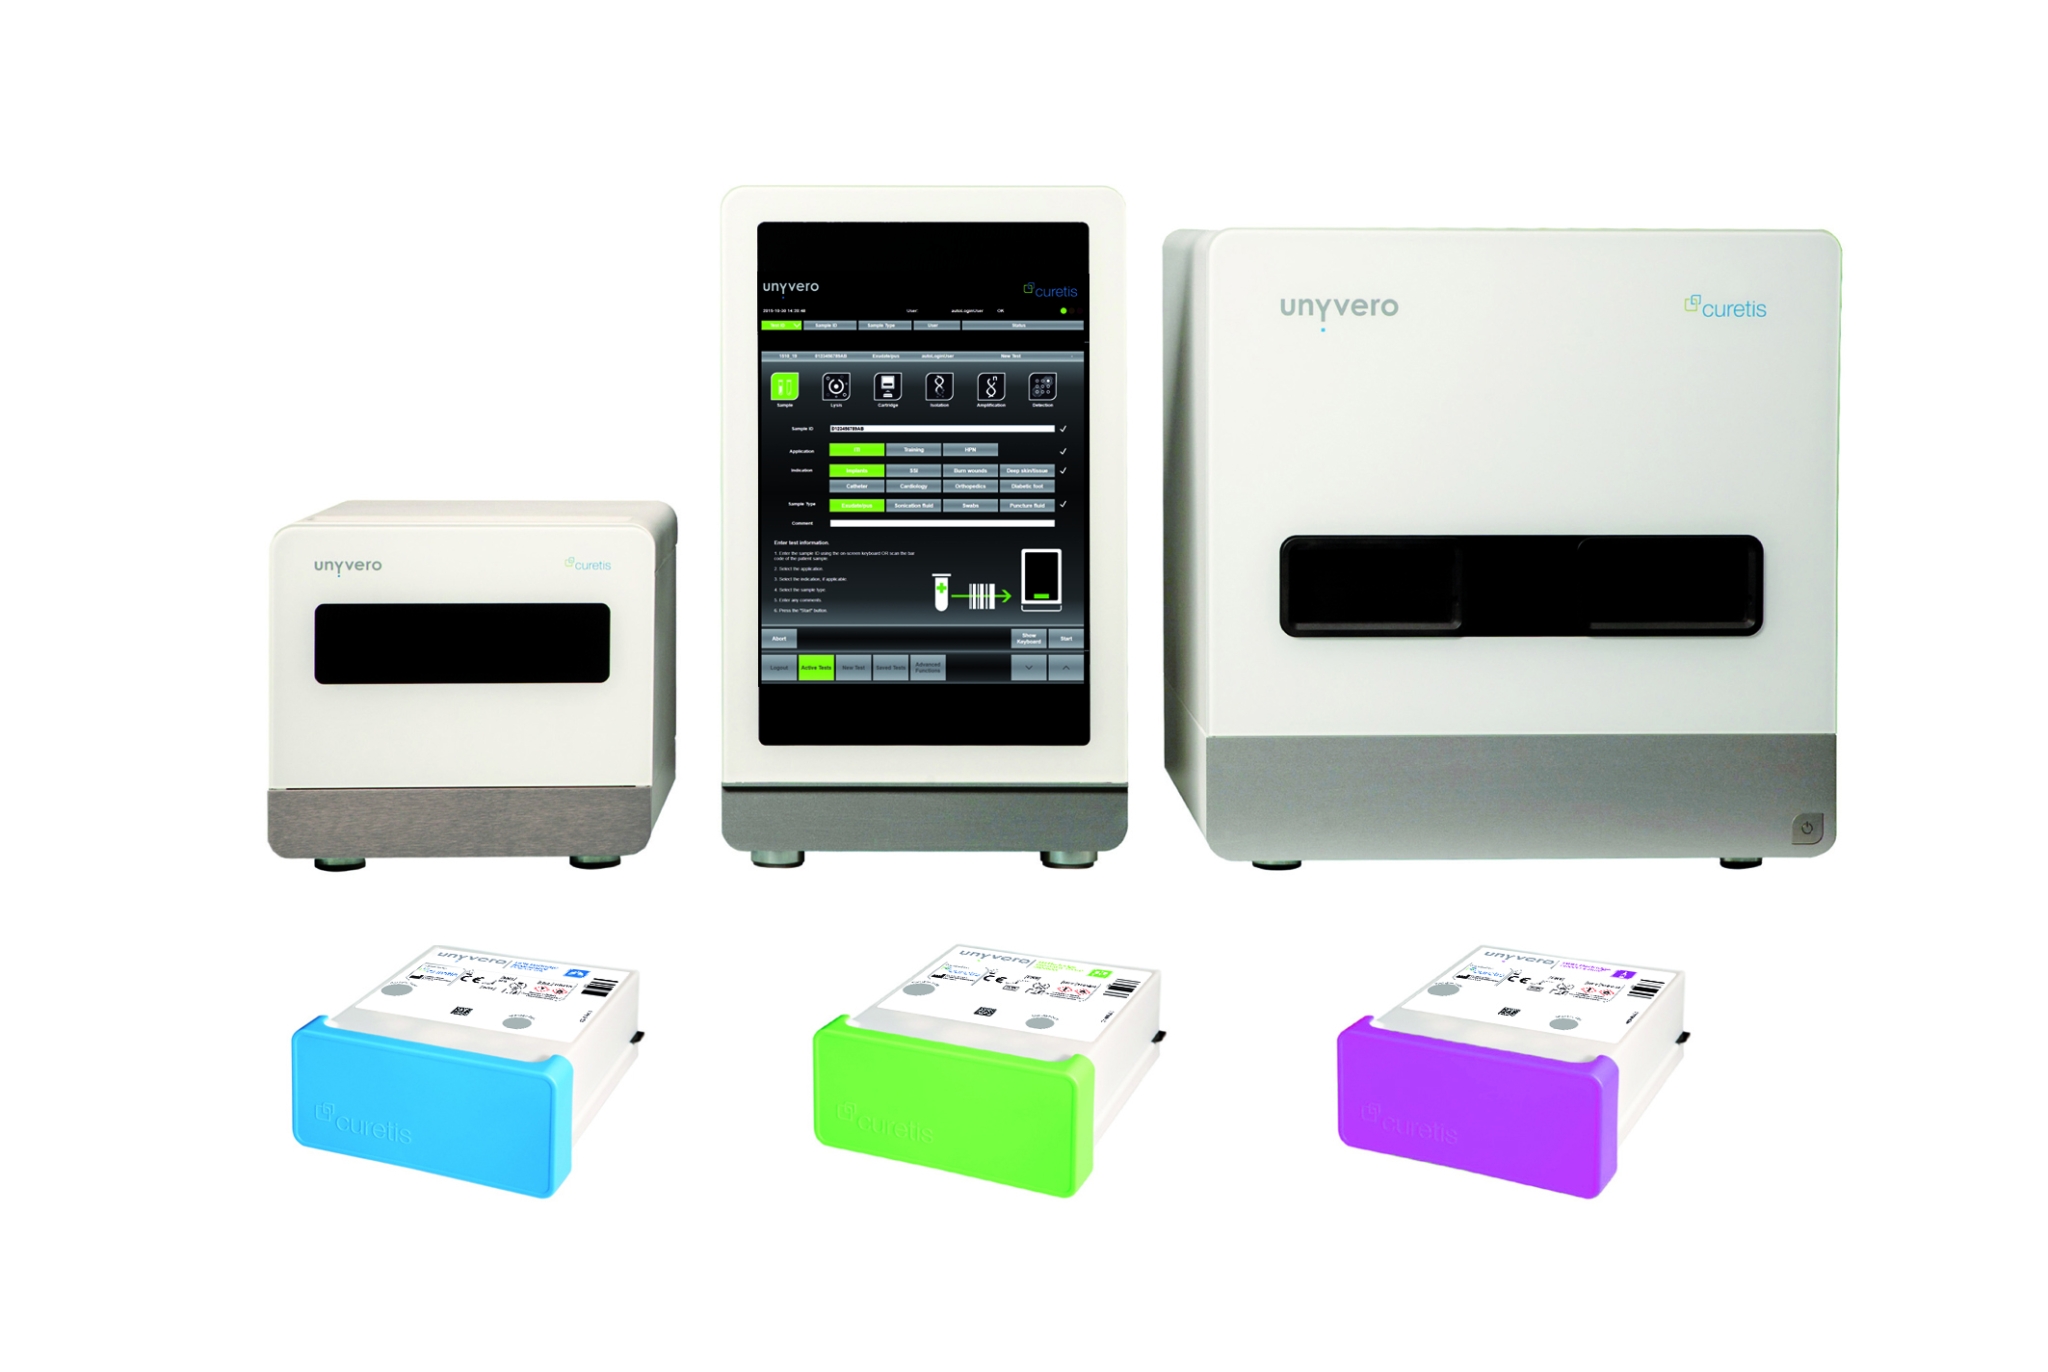 Curetis’ Unyvero platform can be used in hospitalised patients for diagnosing severe infectious diseases.